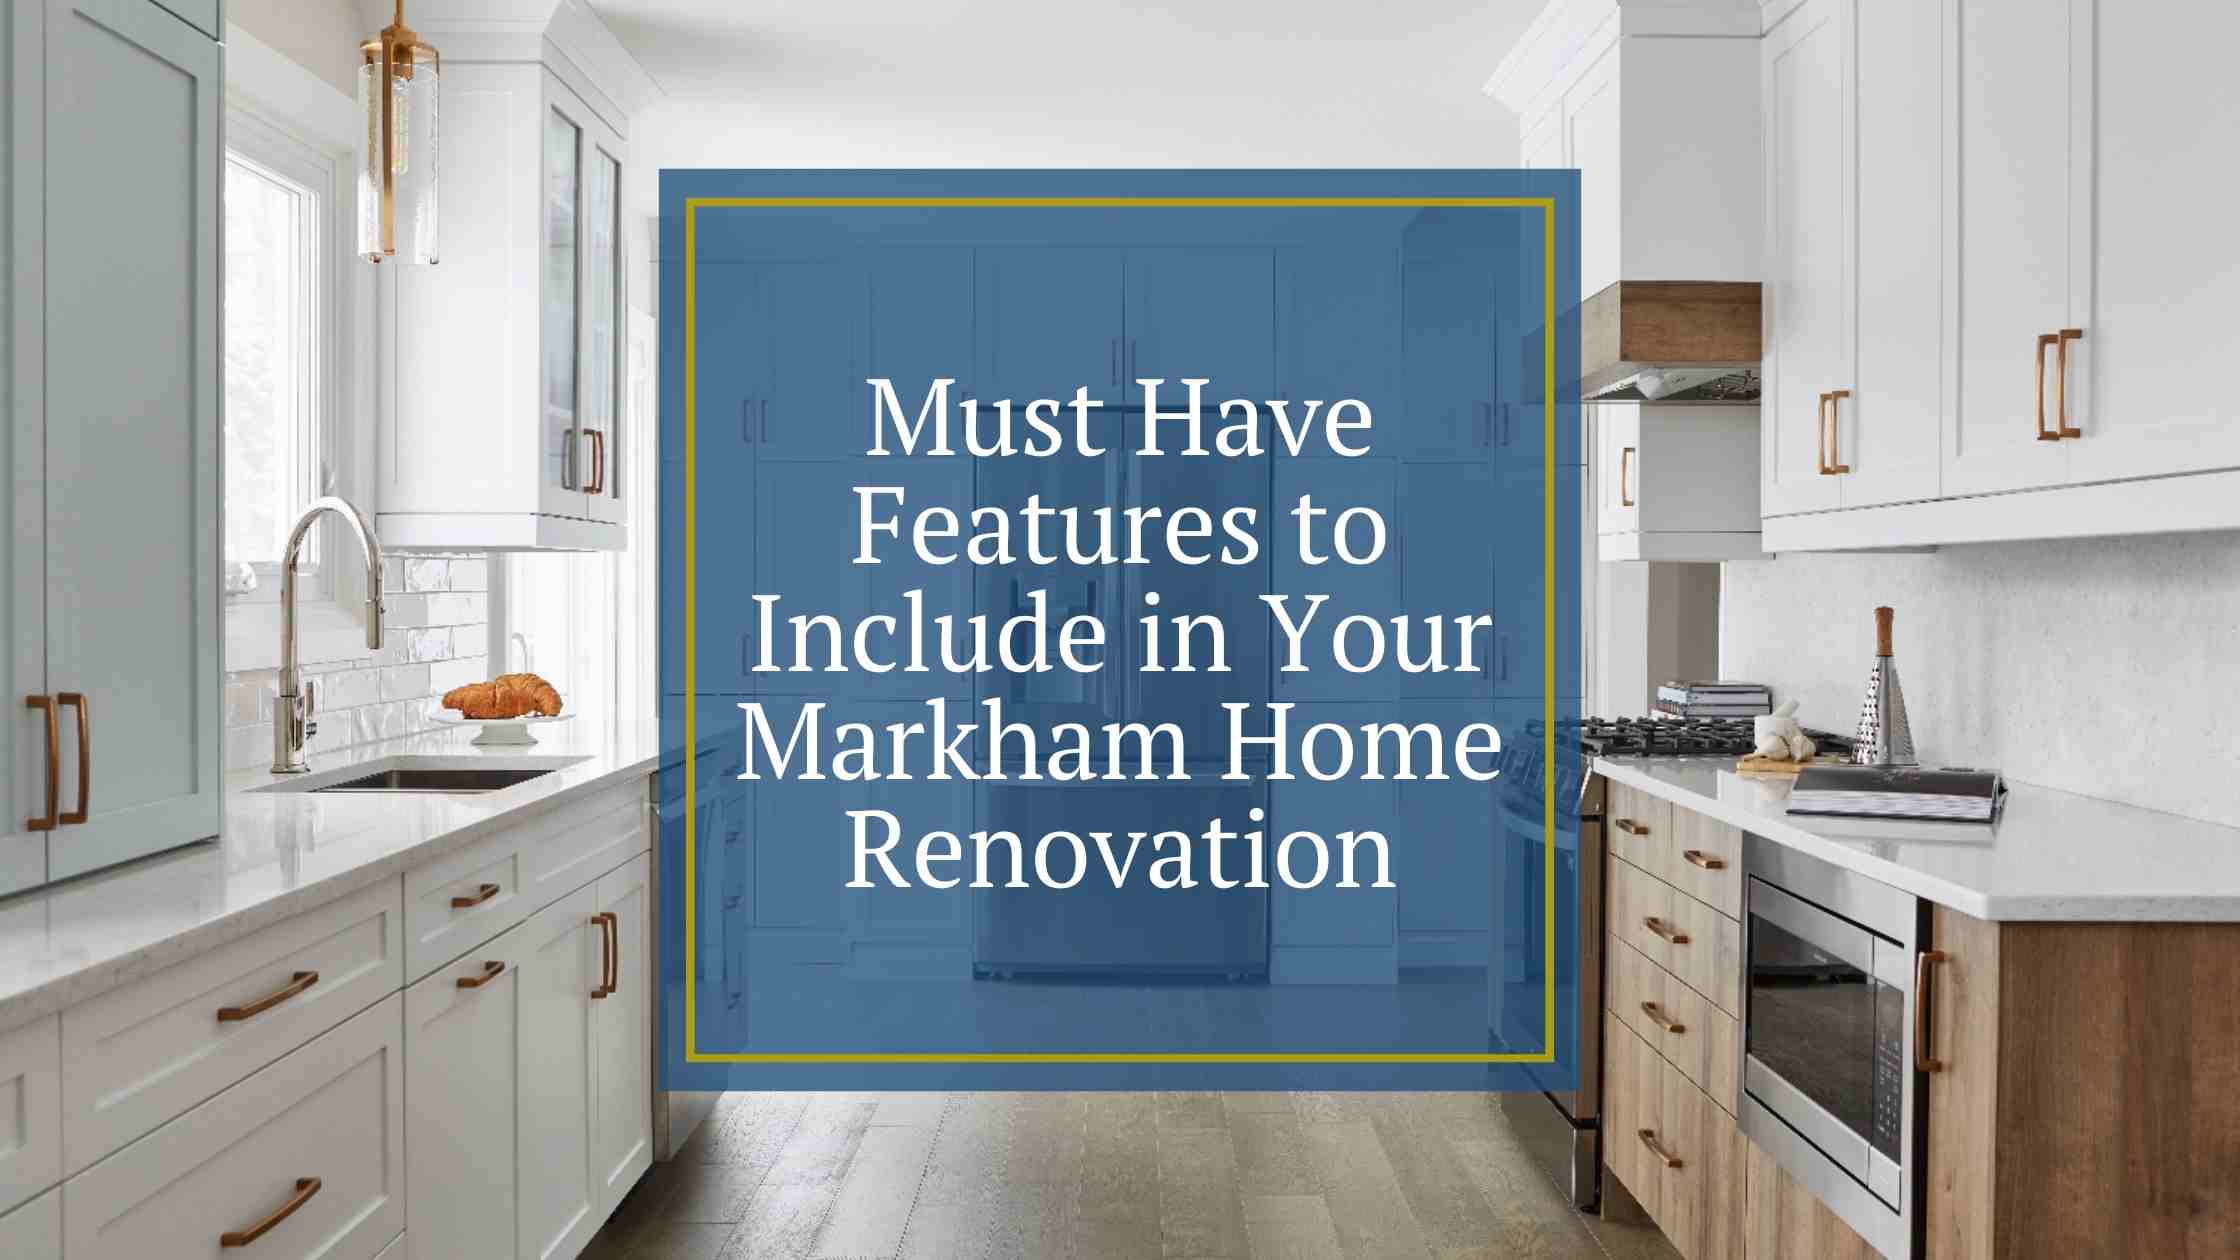 Must Have Features to Include in Your Markham Home Renovation